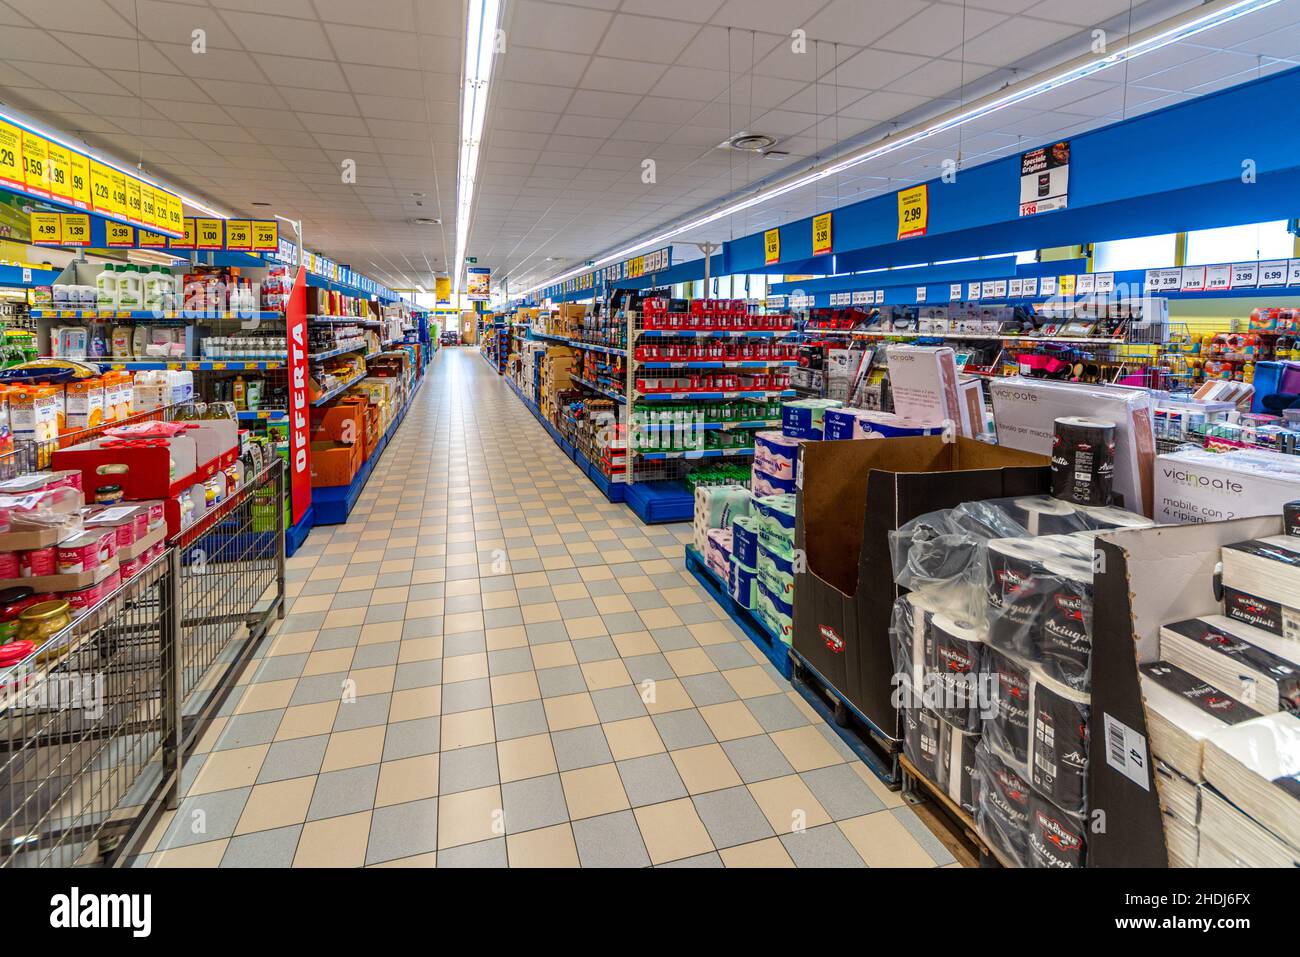 Fossano, Italy - October 29, 2021: interior view of sales shelves of Eurospin discount supermarket Stock Photo